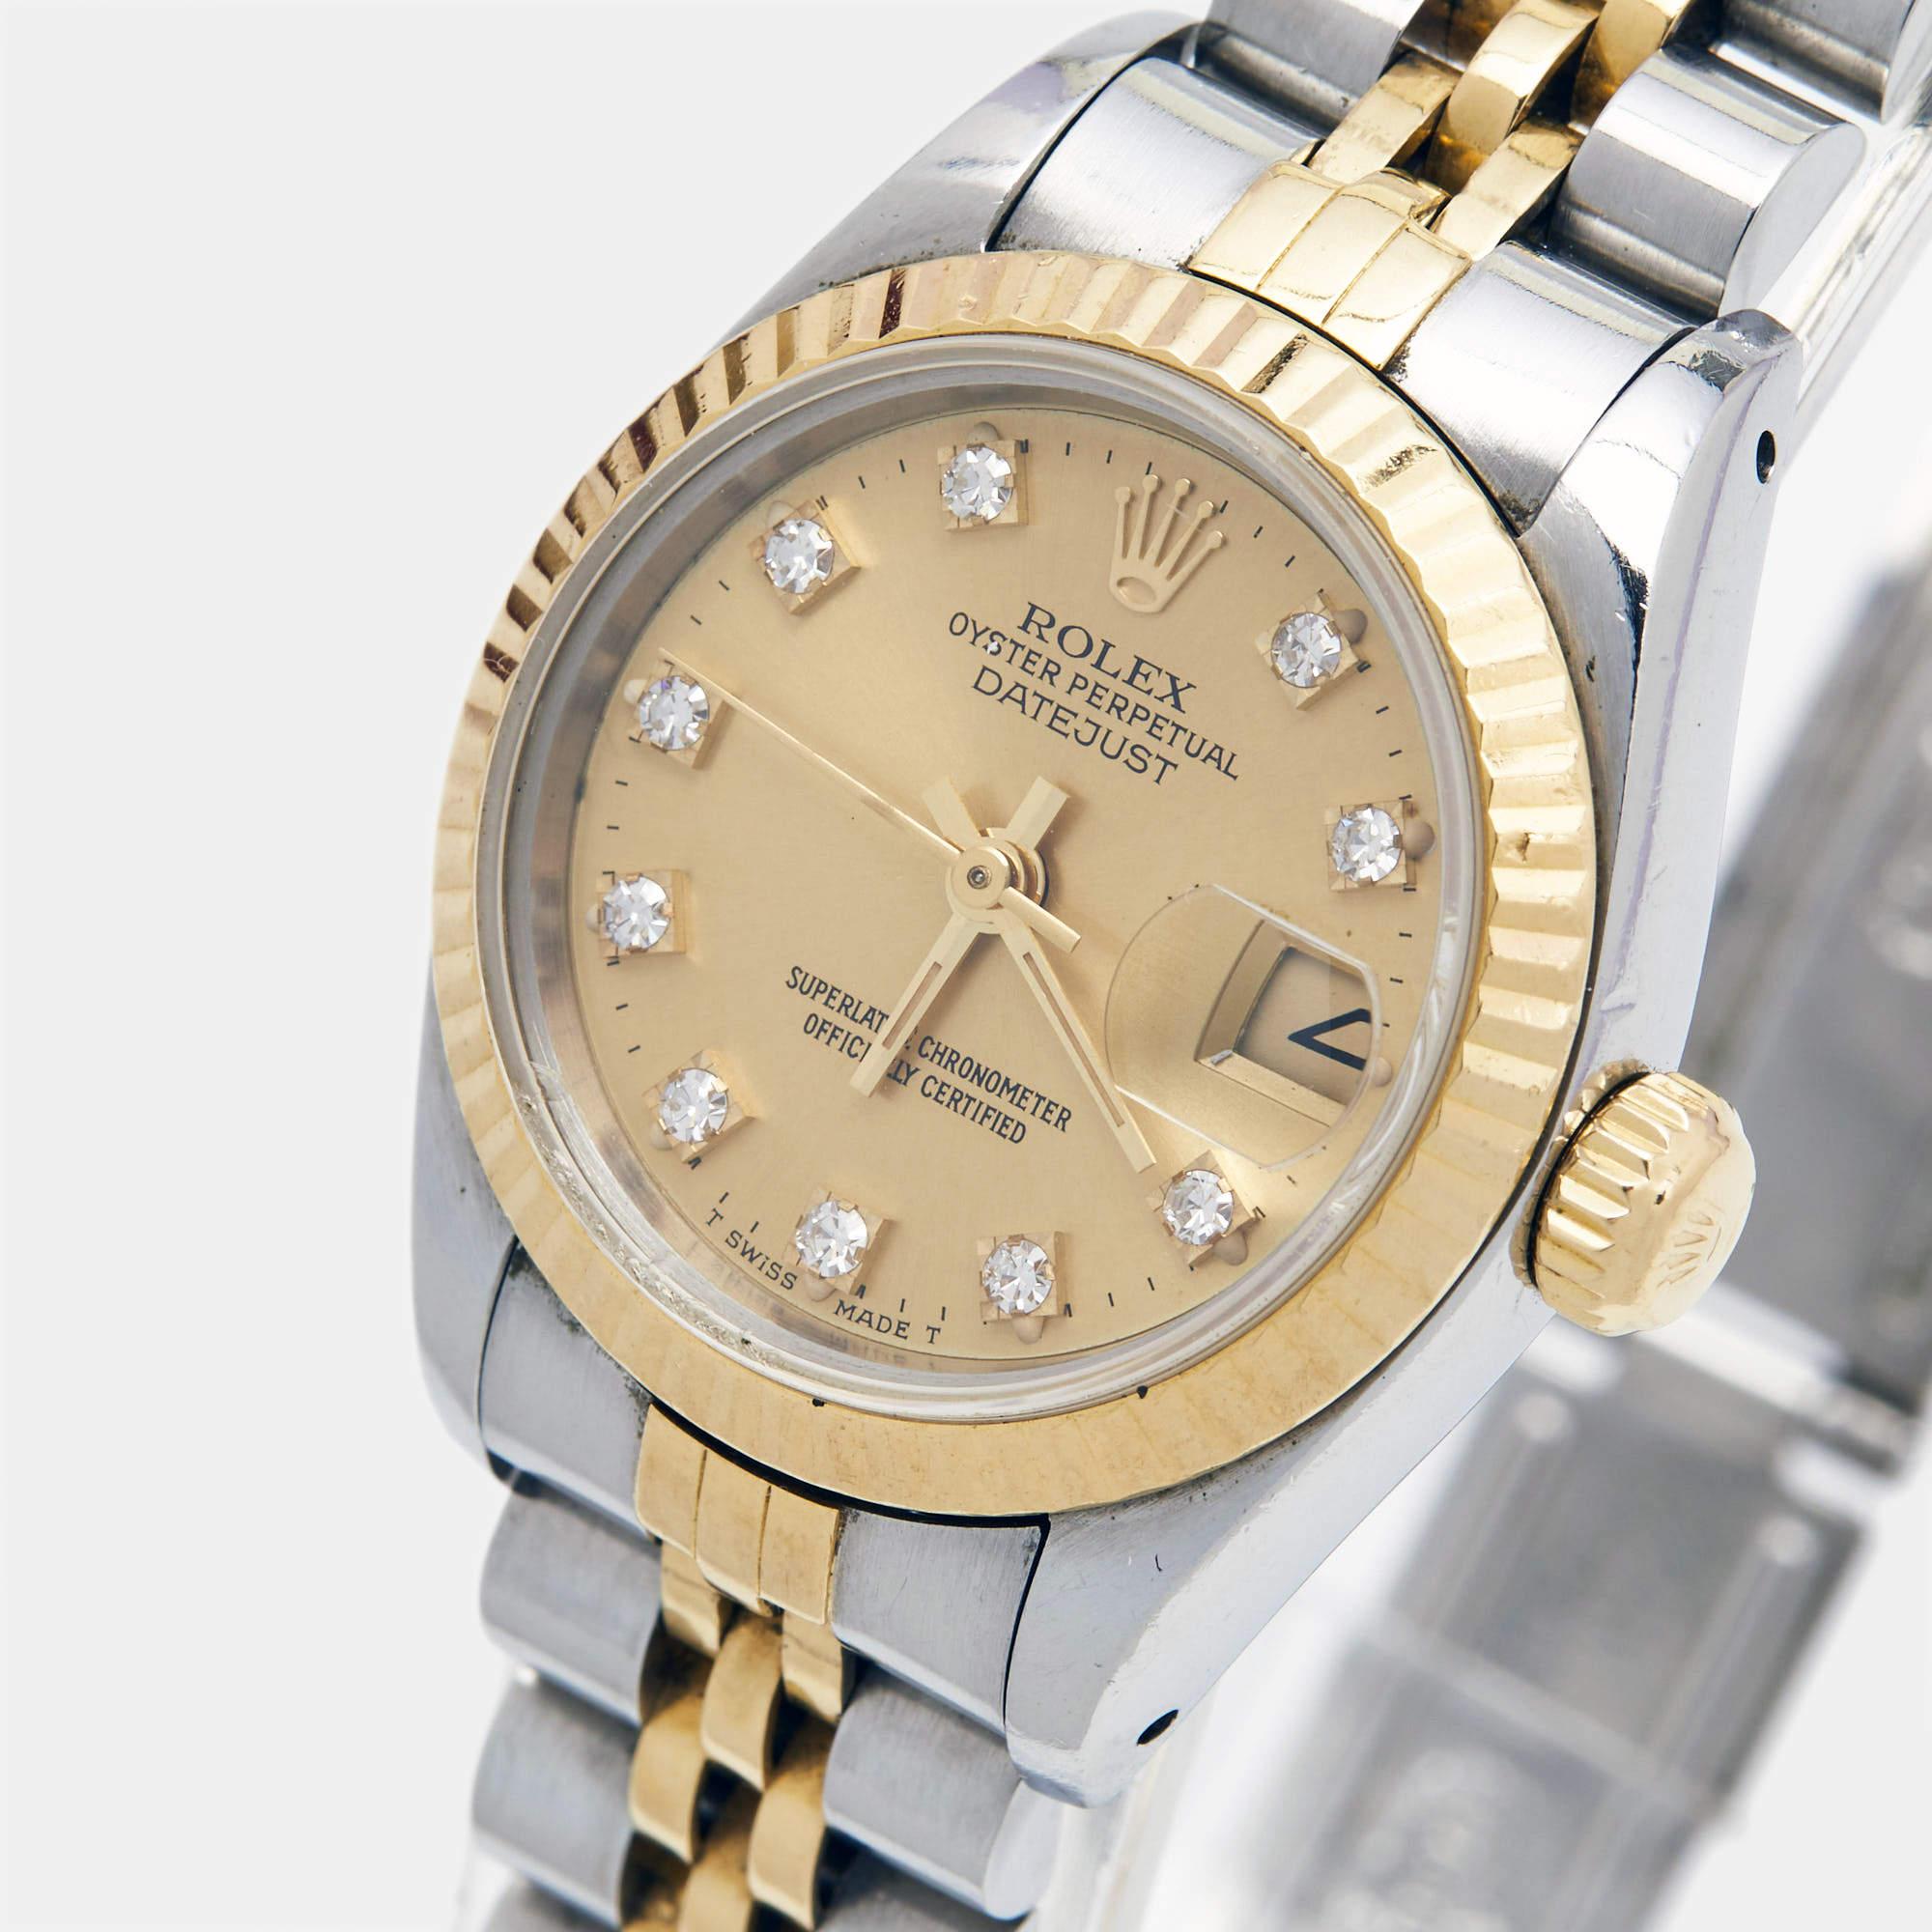 Uncut Rolex Champagne Diamond 18k Yellow Gold And Stainless Steel Datejust 69173 For Sale